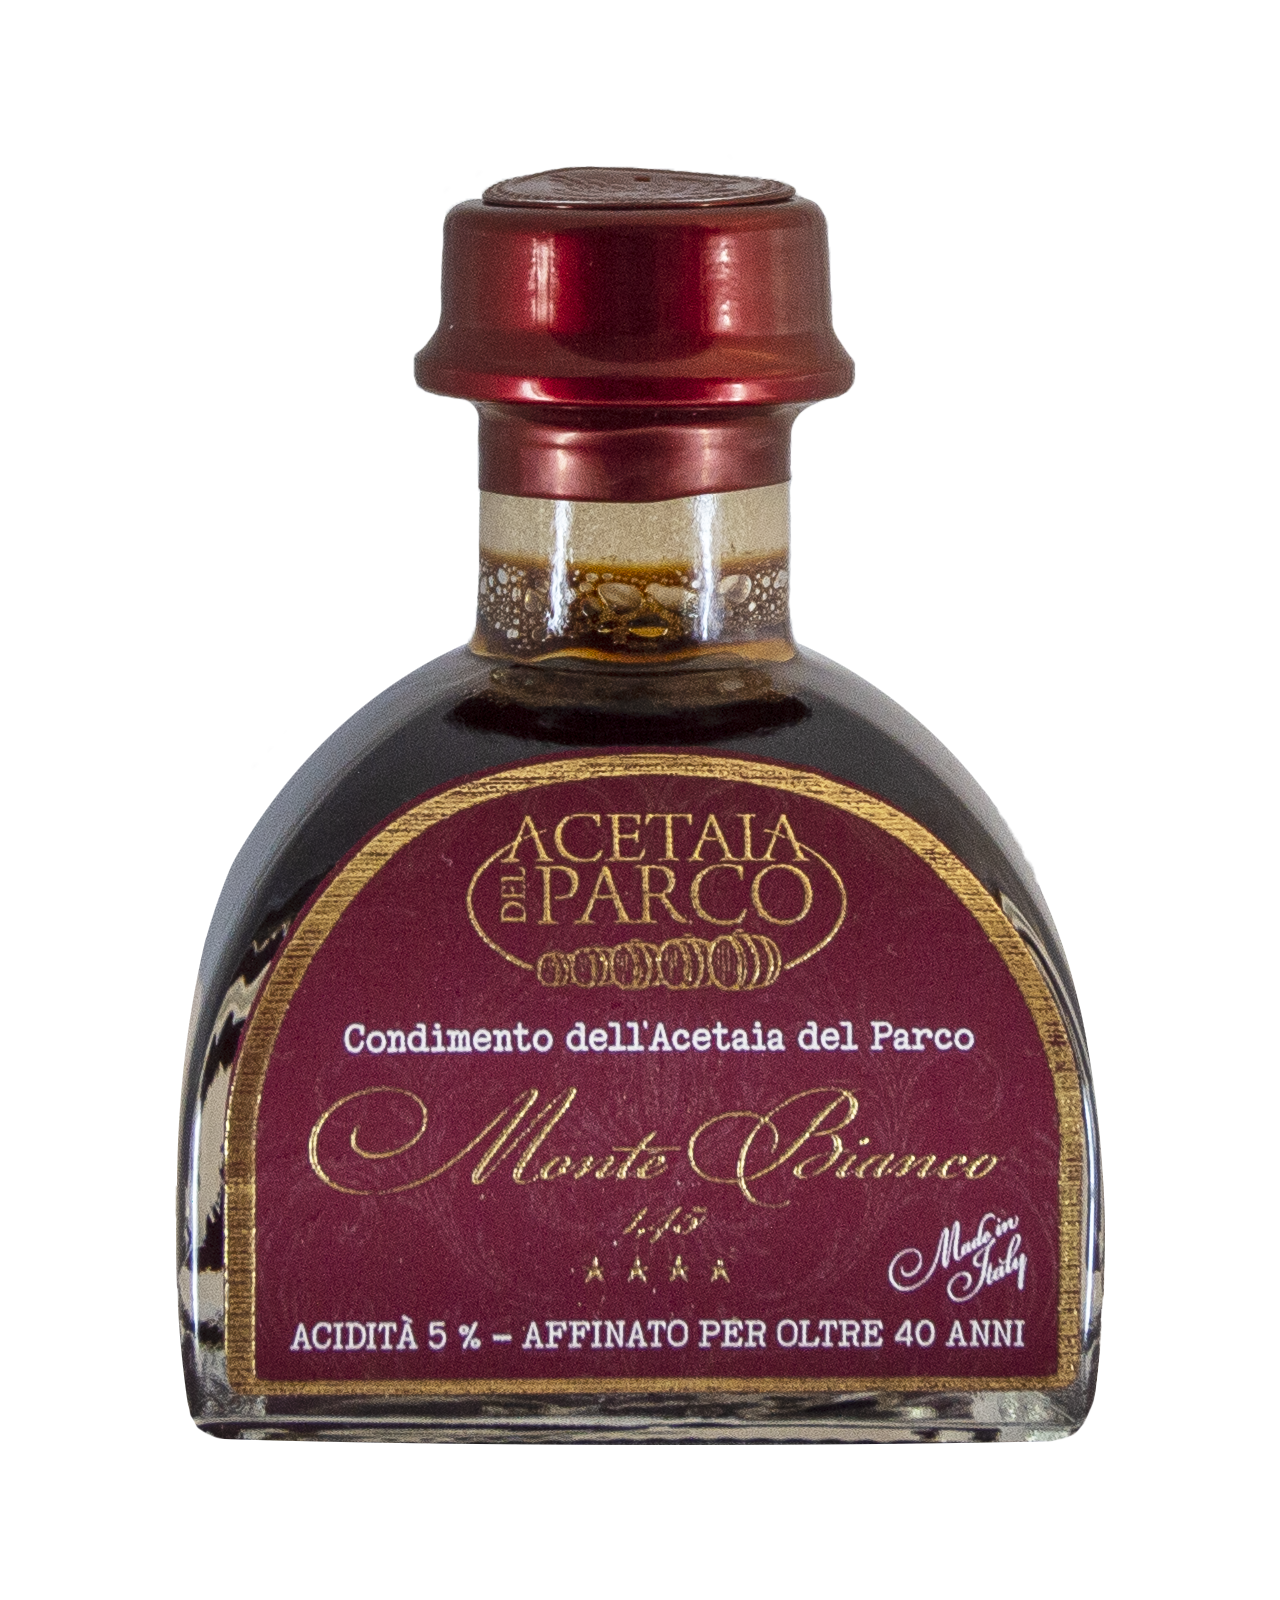 Monte Bianco label - Balsamic seasoning aged 40 years - Acetaia de Parco